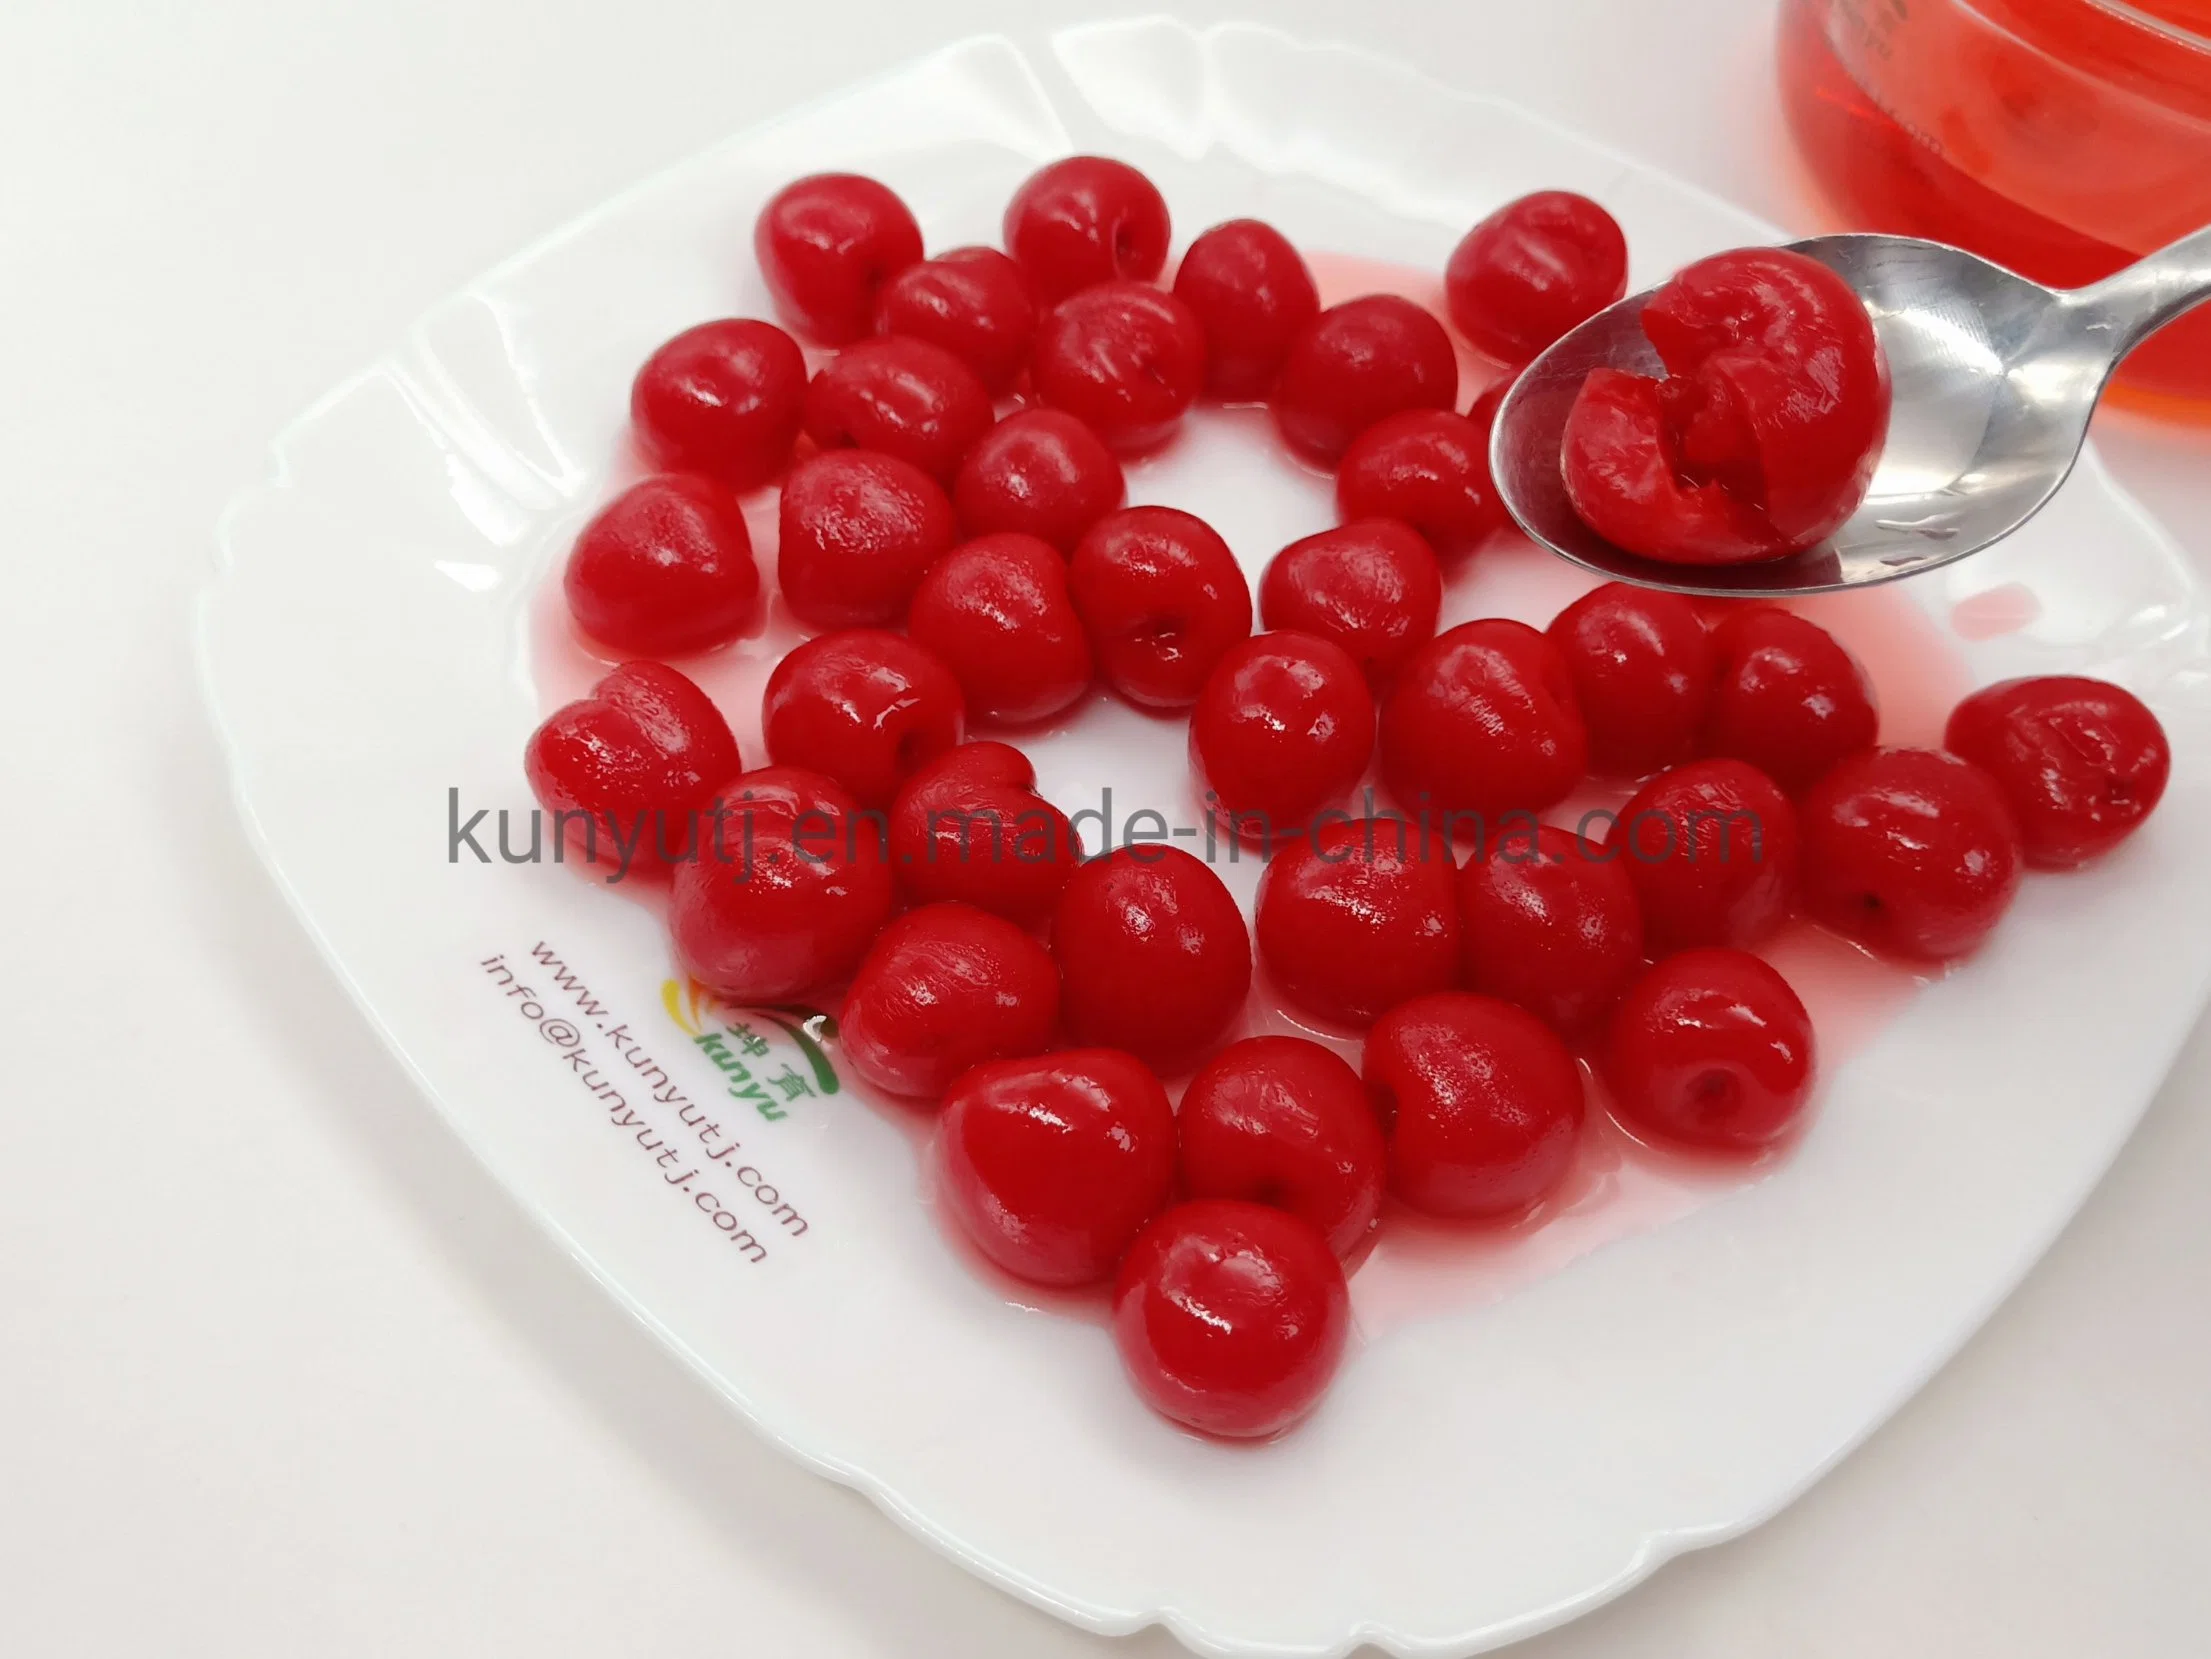 Healthy and Natural New Crop Canned Red Cherry in Light Syrup